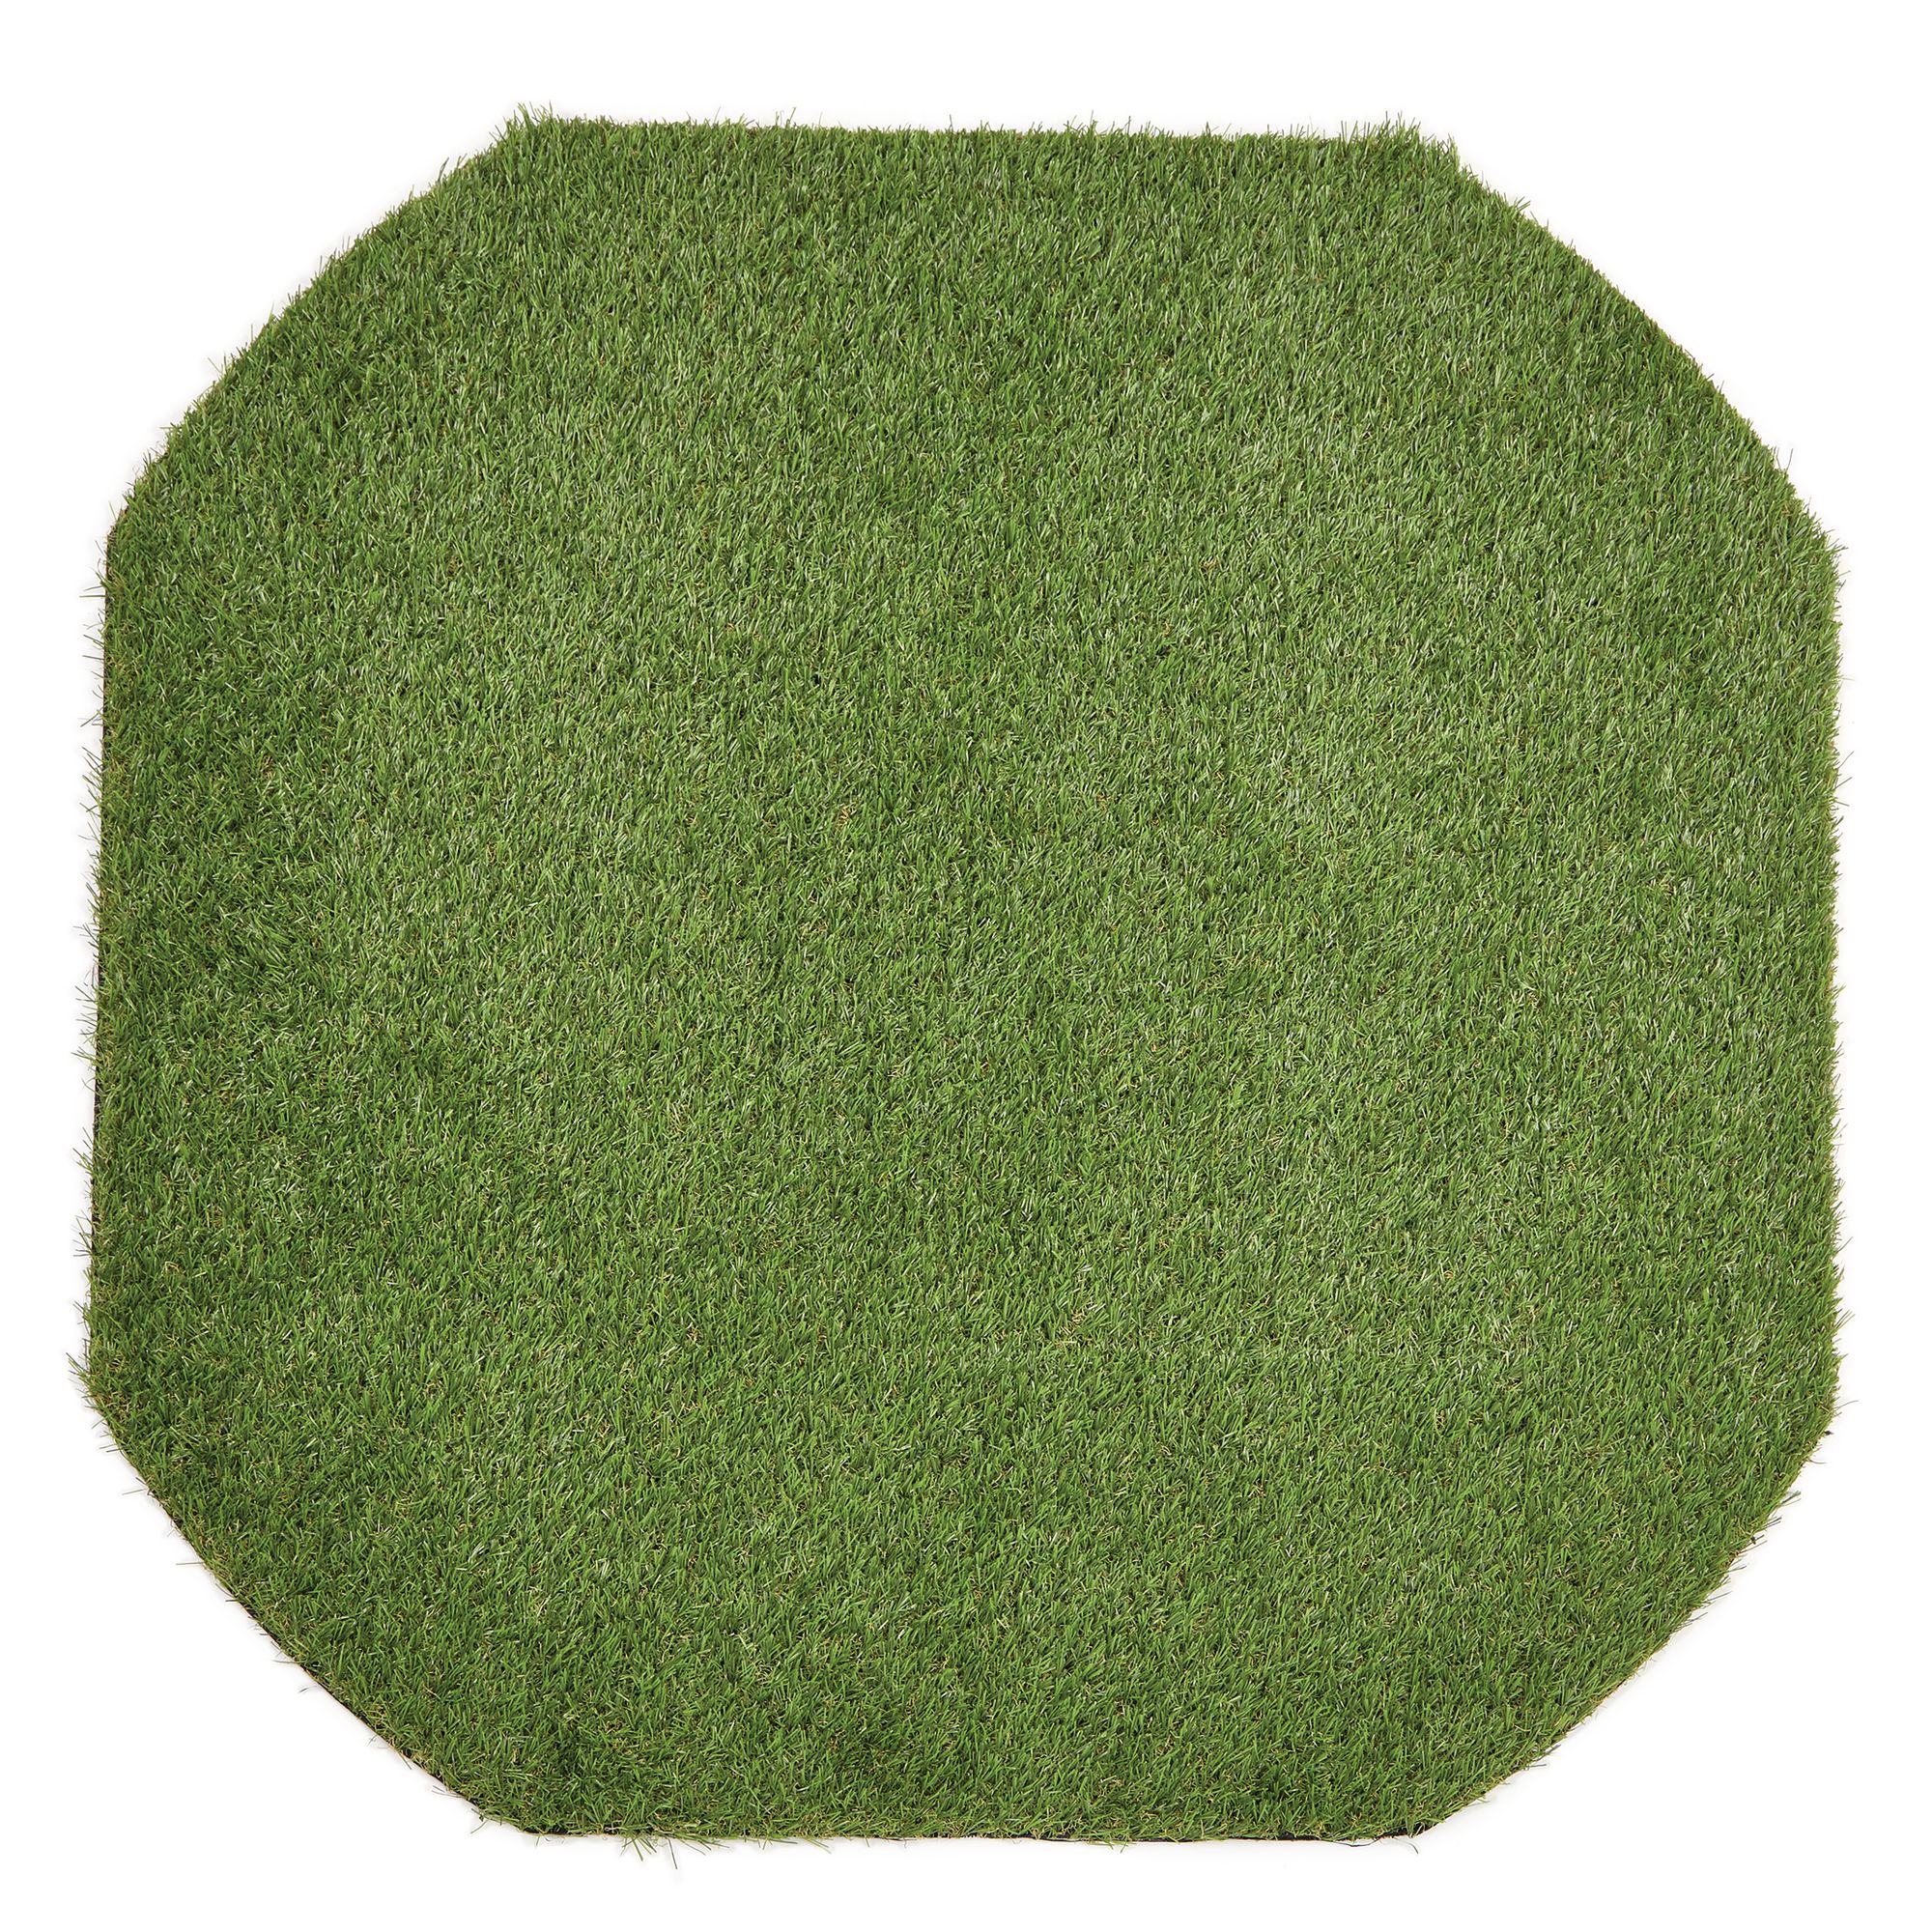 G1625890 - Grass Style Sensory Play Tray Mat from Hope Education